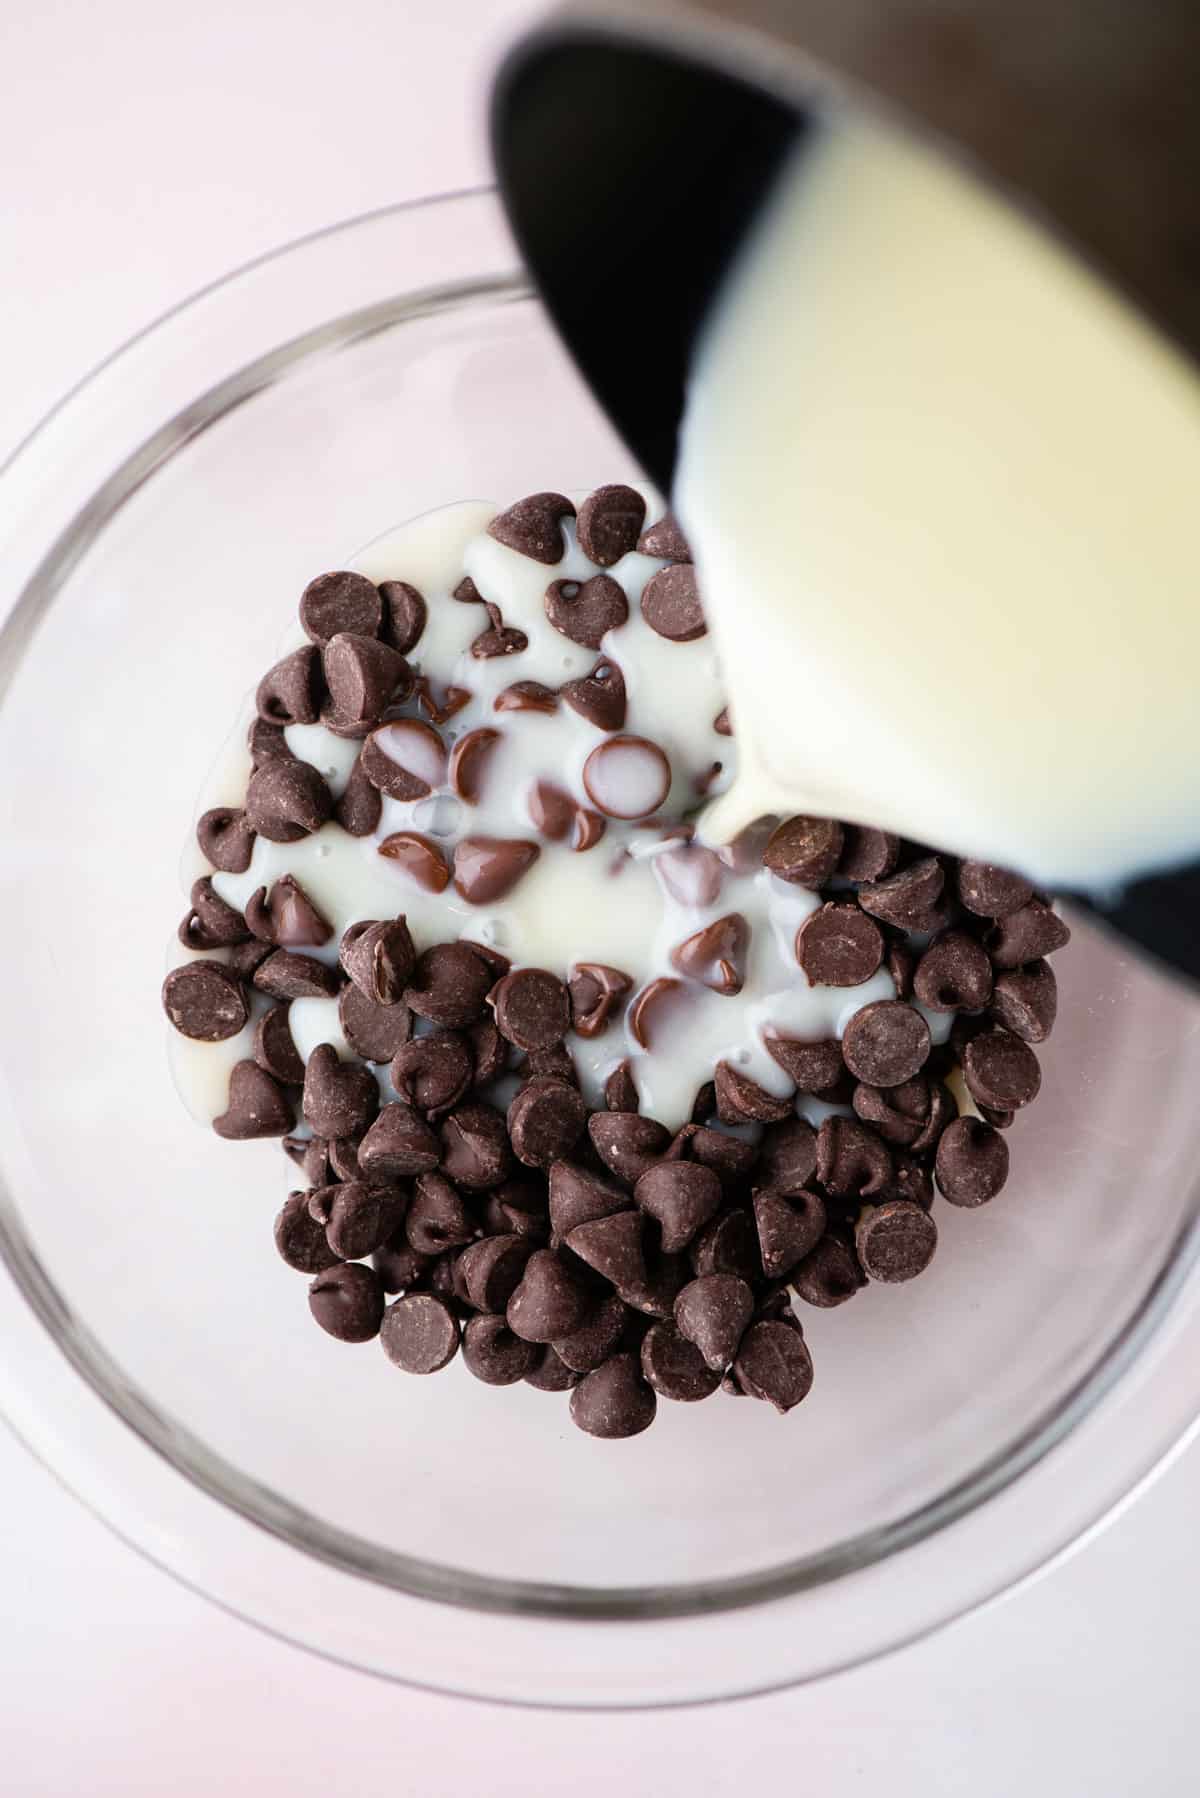 a mixture of heavy cream and sugar being poured over a glass bowl of chocolate chips to make homemade hot fudge sauce